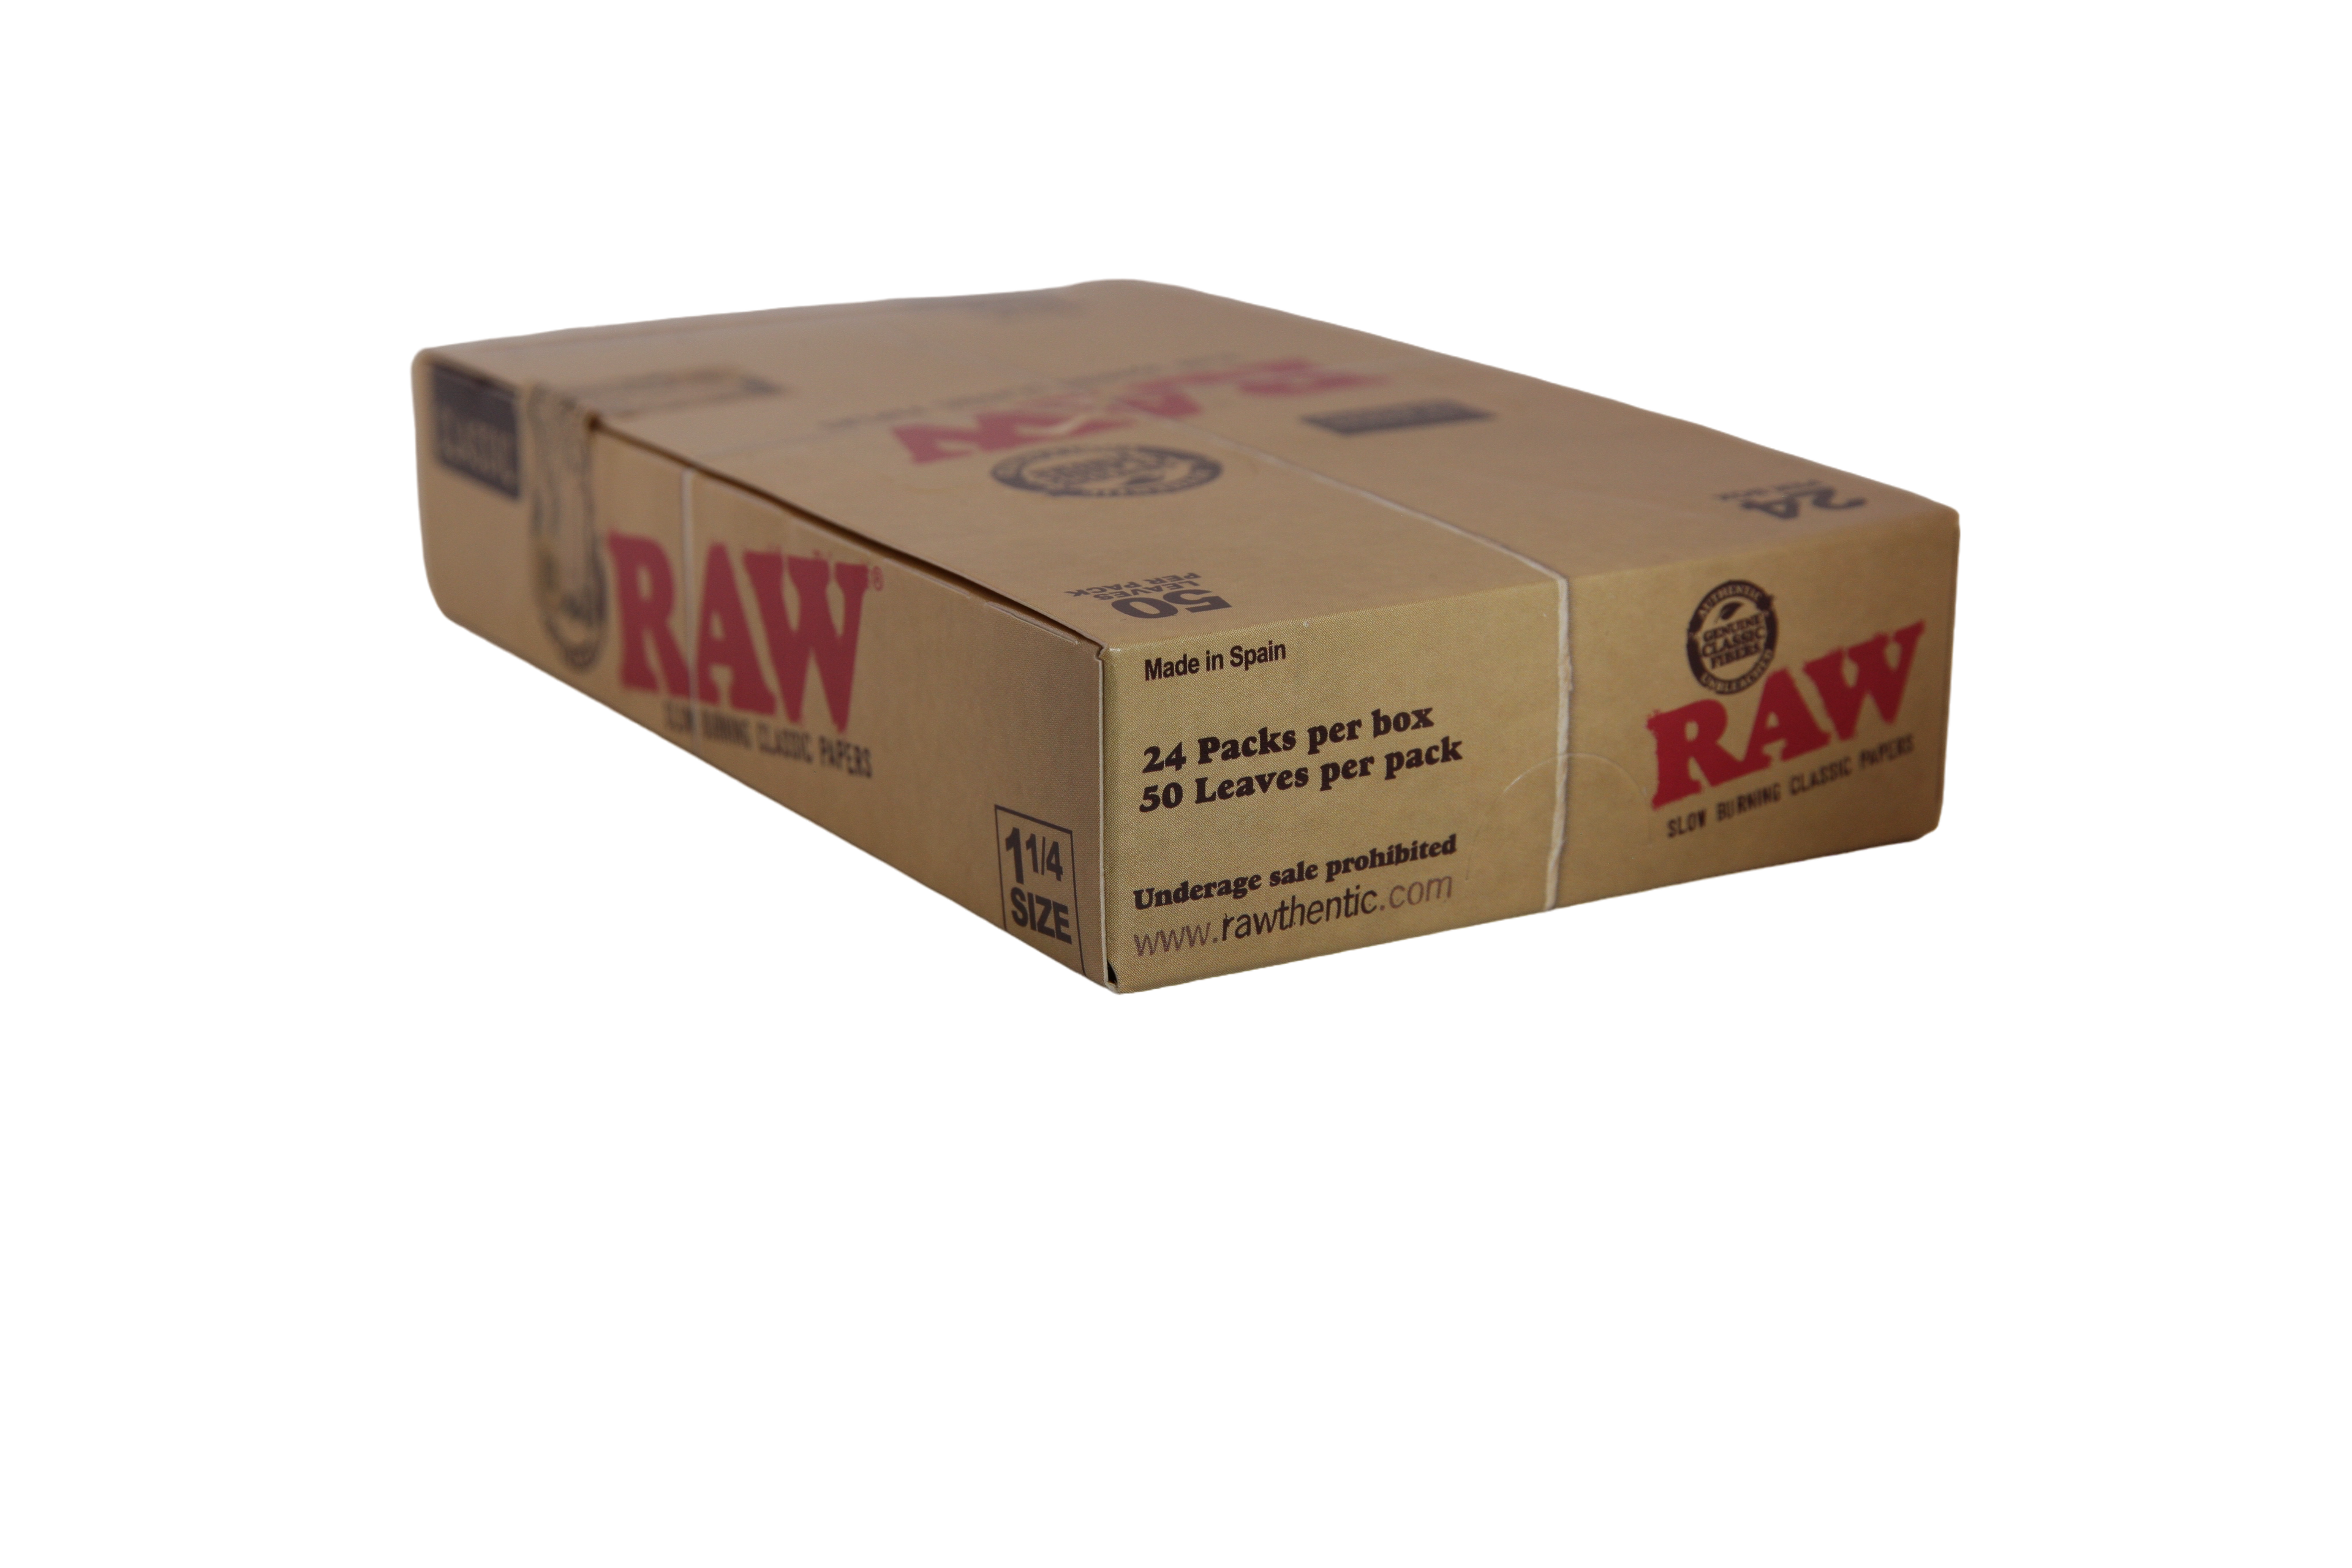 Raw Classic Papers - 1 1/4 / Box of 24